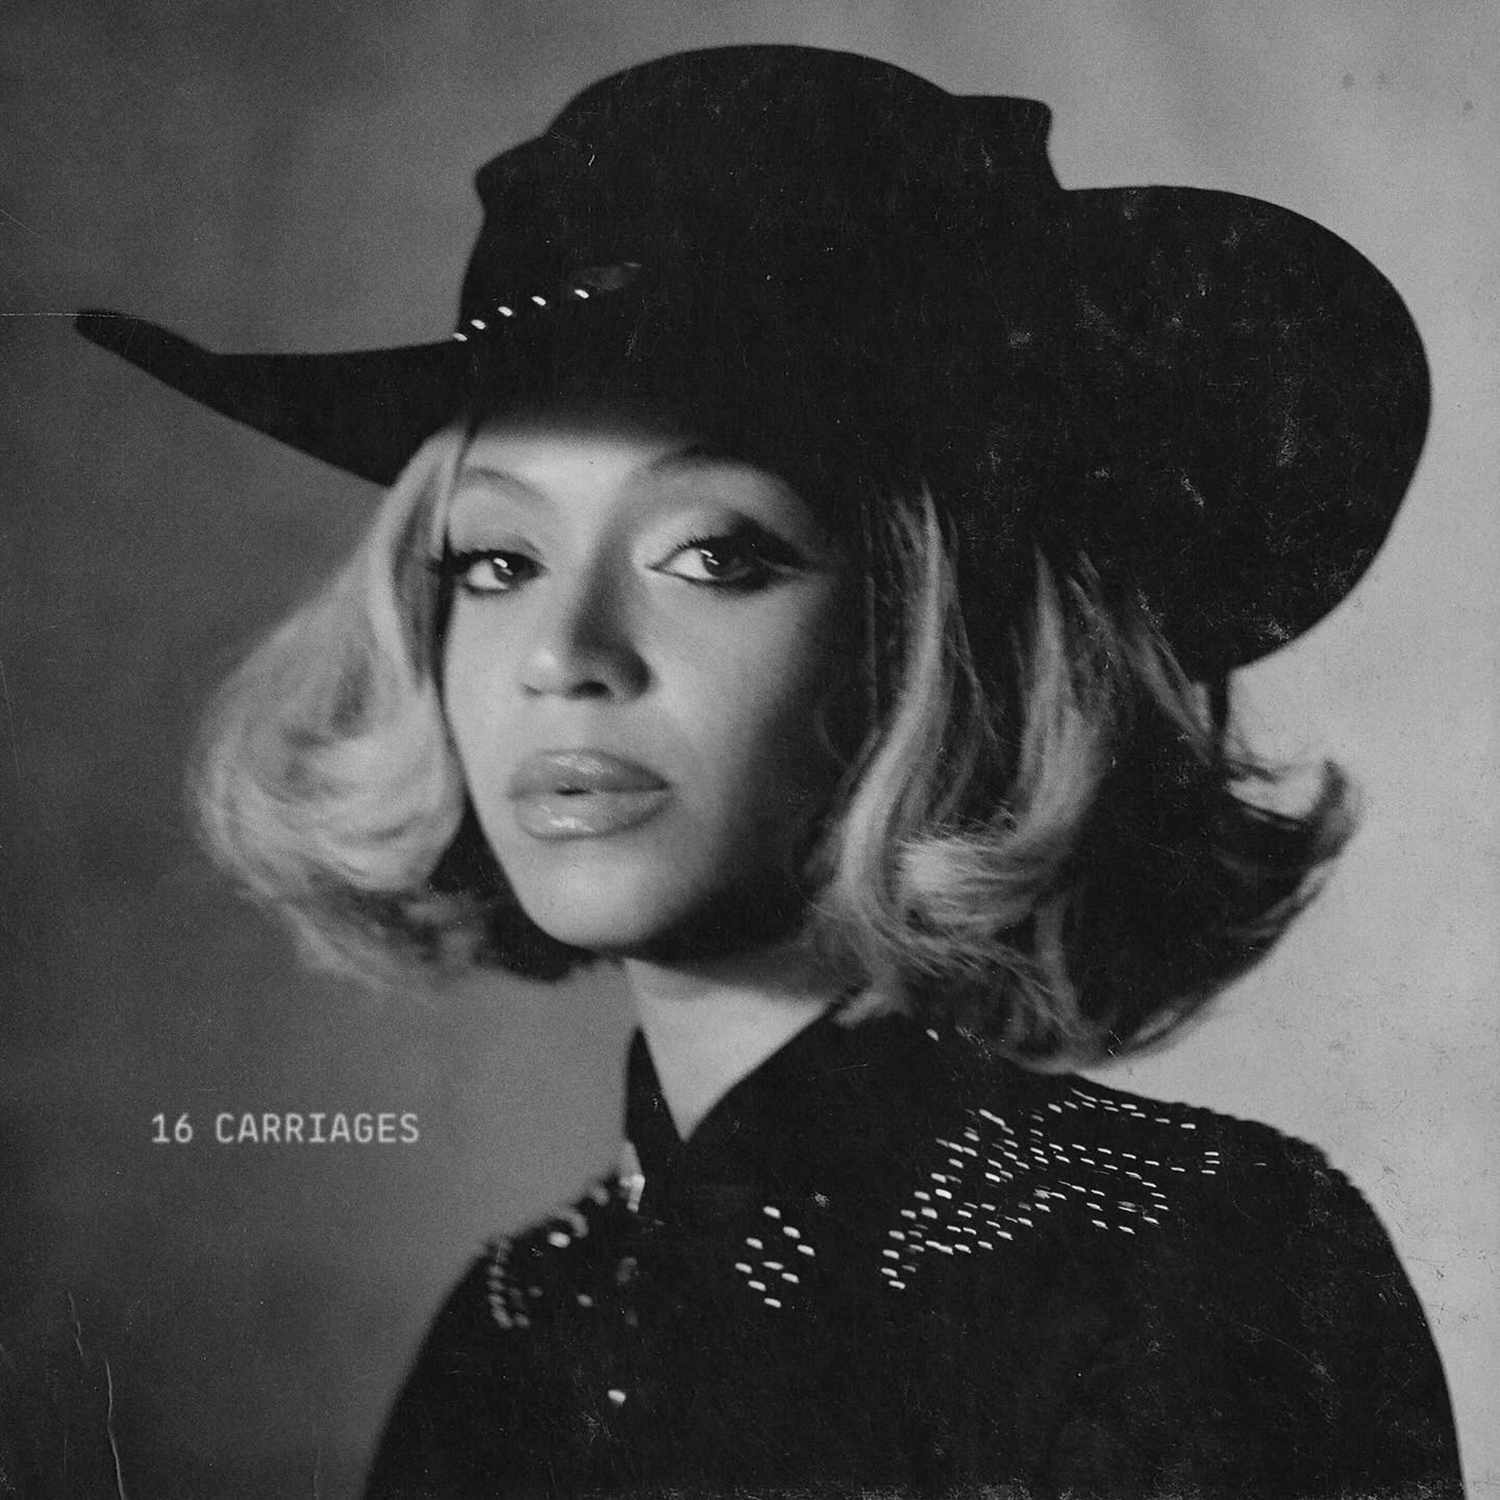 Beyonce's '16 Carriages' cover art. 